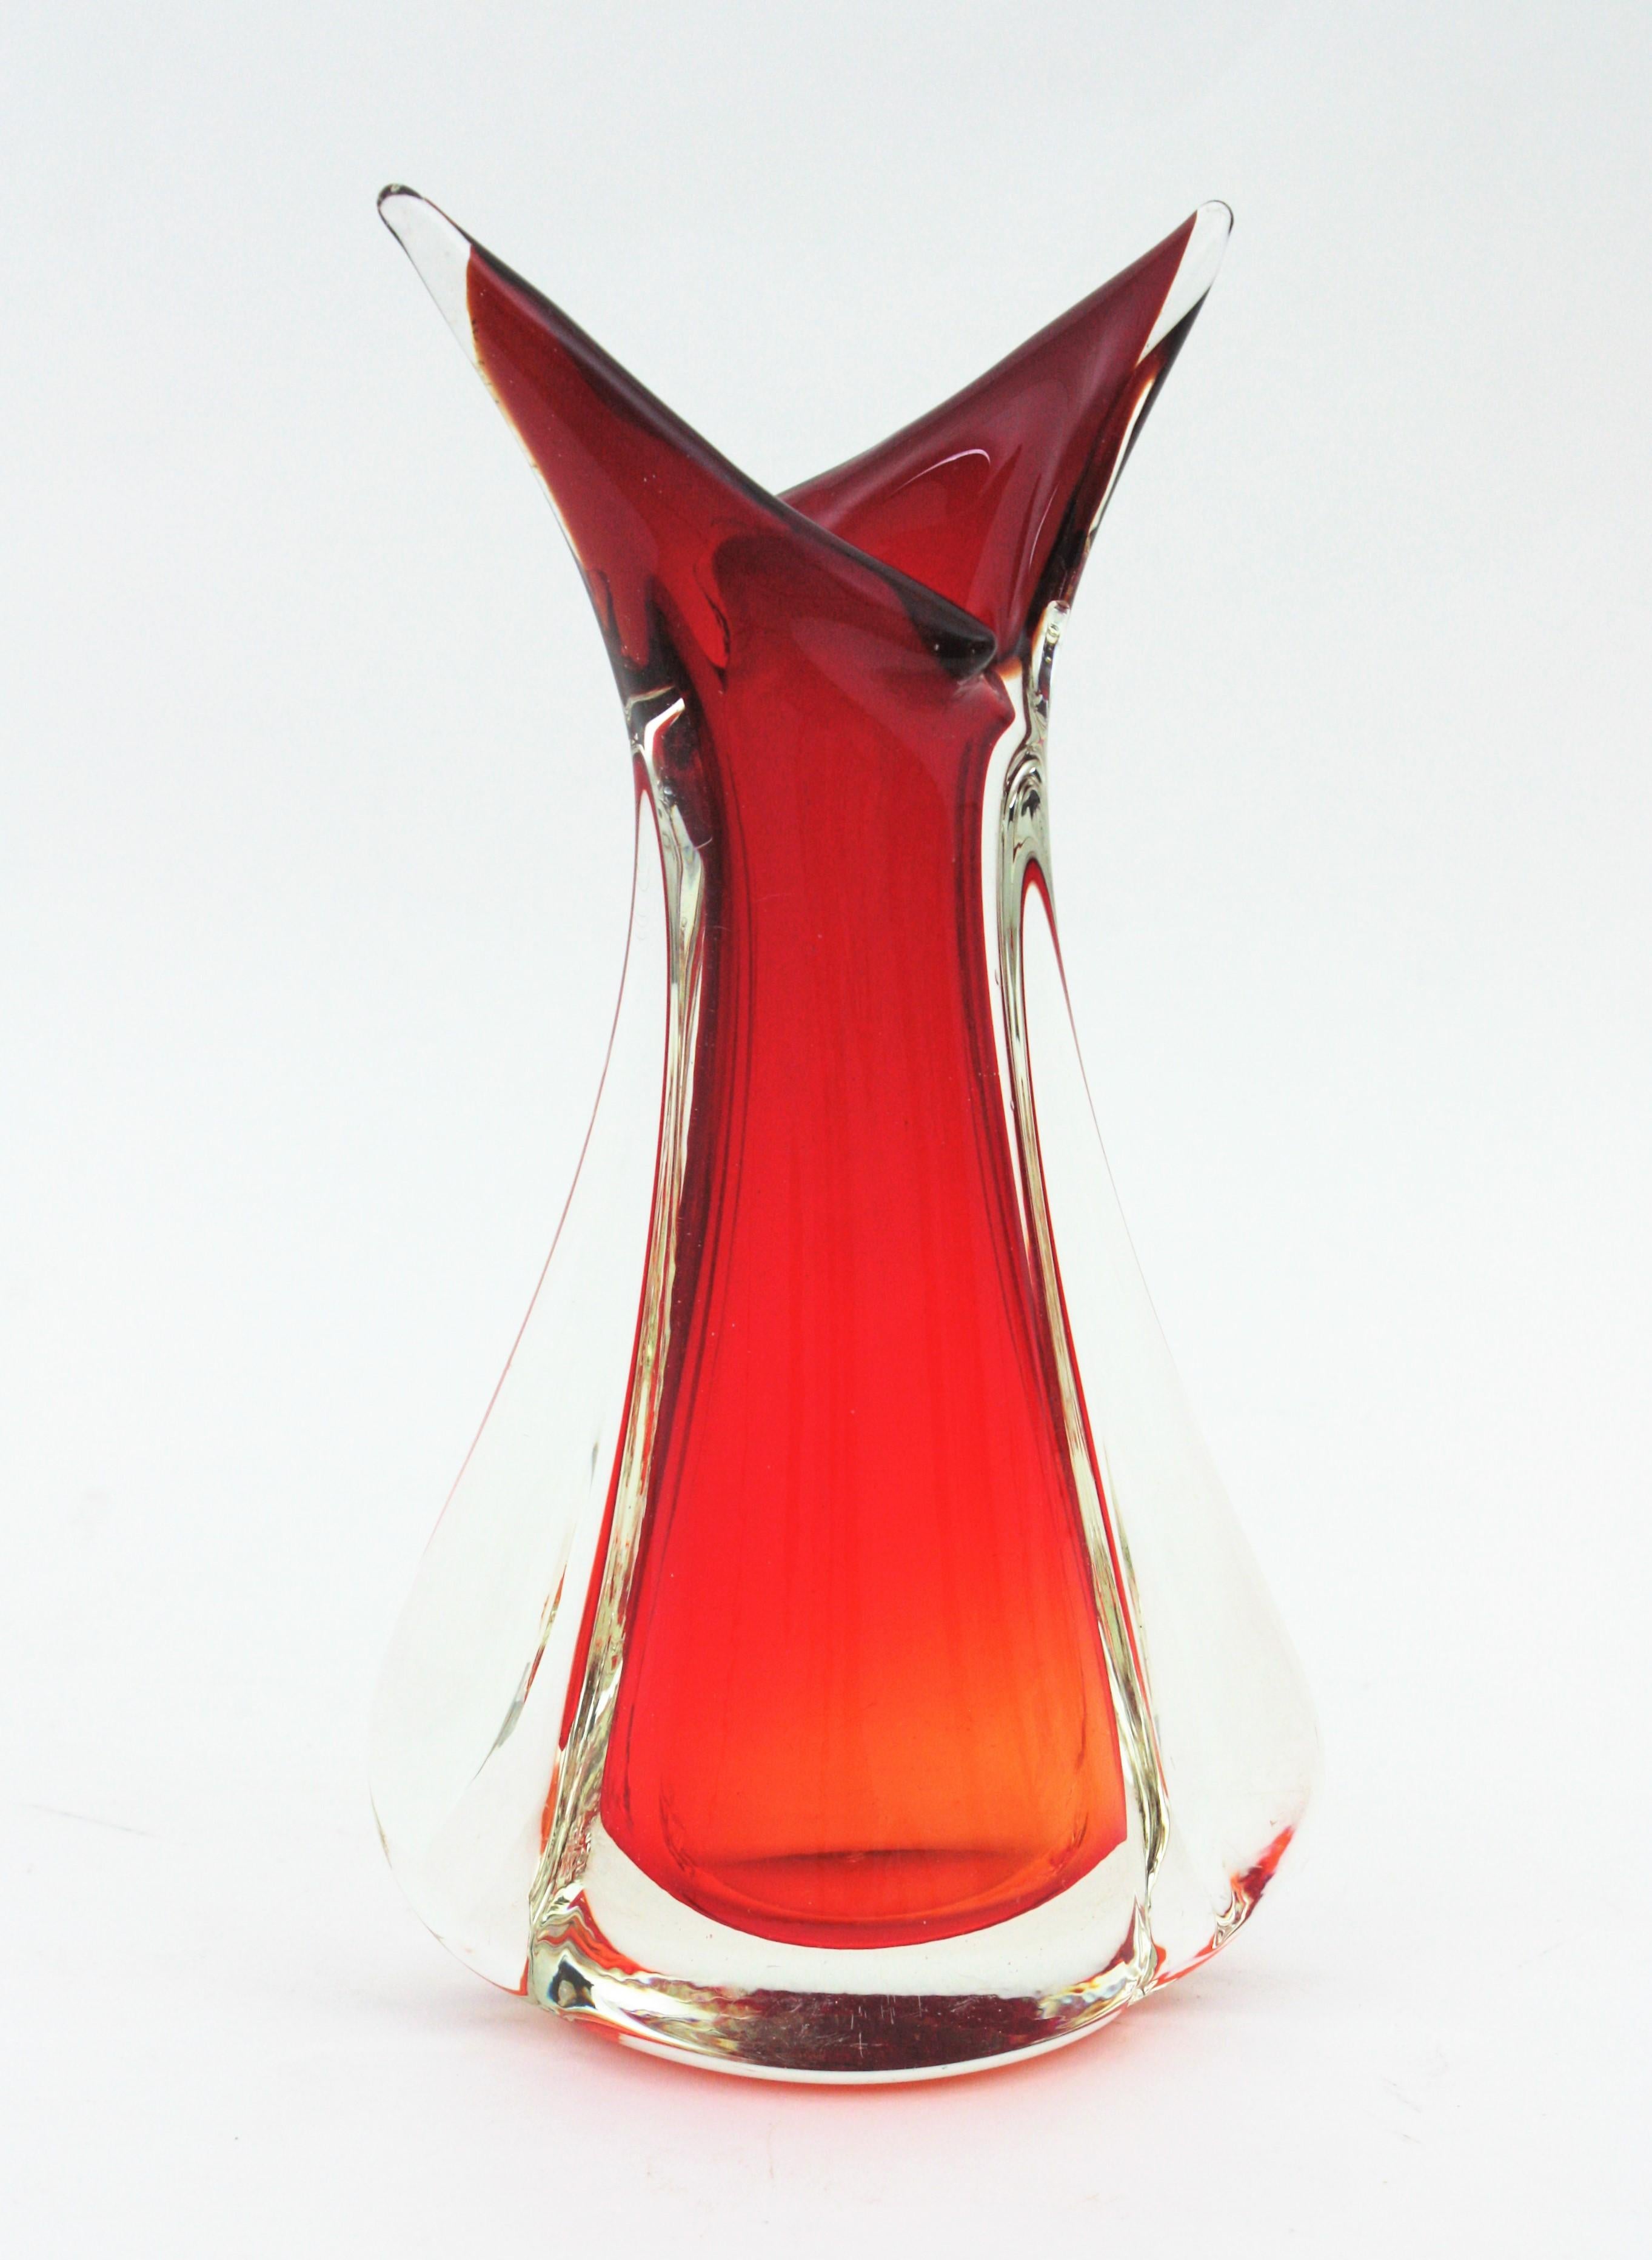 Sculptural Murano art glass vase in shades of Red and Orange. Designed by Flavio Poli and manufactured by Seguso Vetri d'Arte. Italy, 1950s.
Vibrant colors: Red and orange glass with cased into clear glass using the Sommerso technique.
Amazing